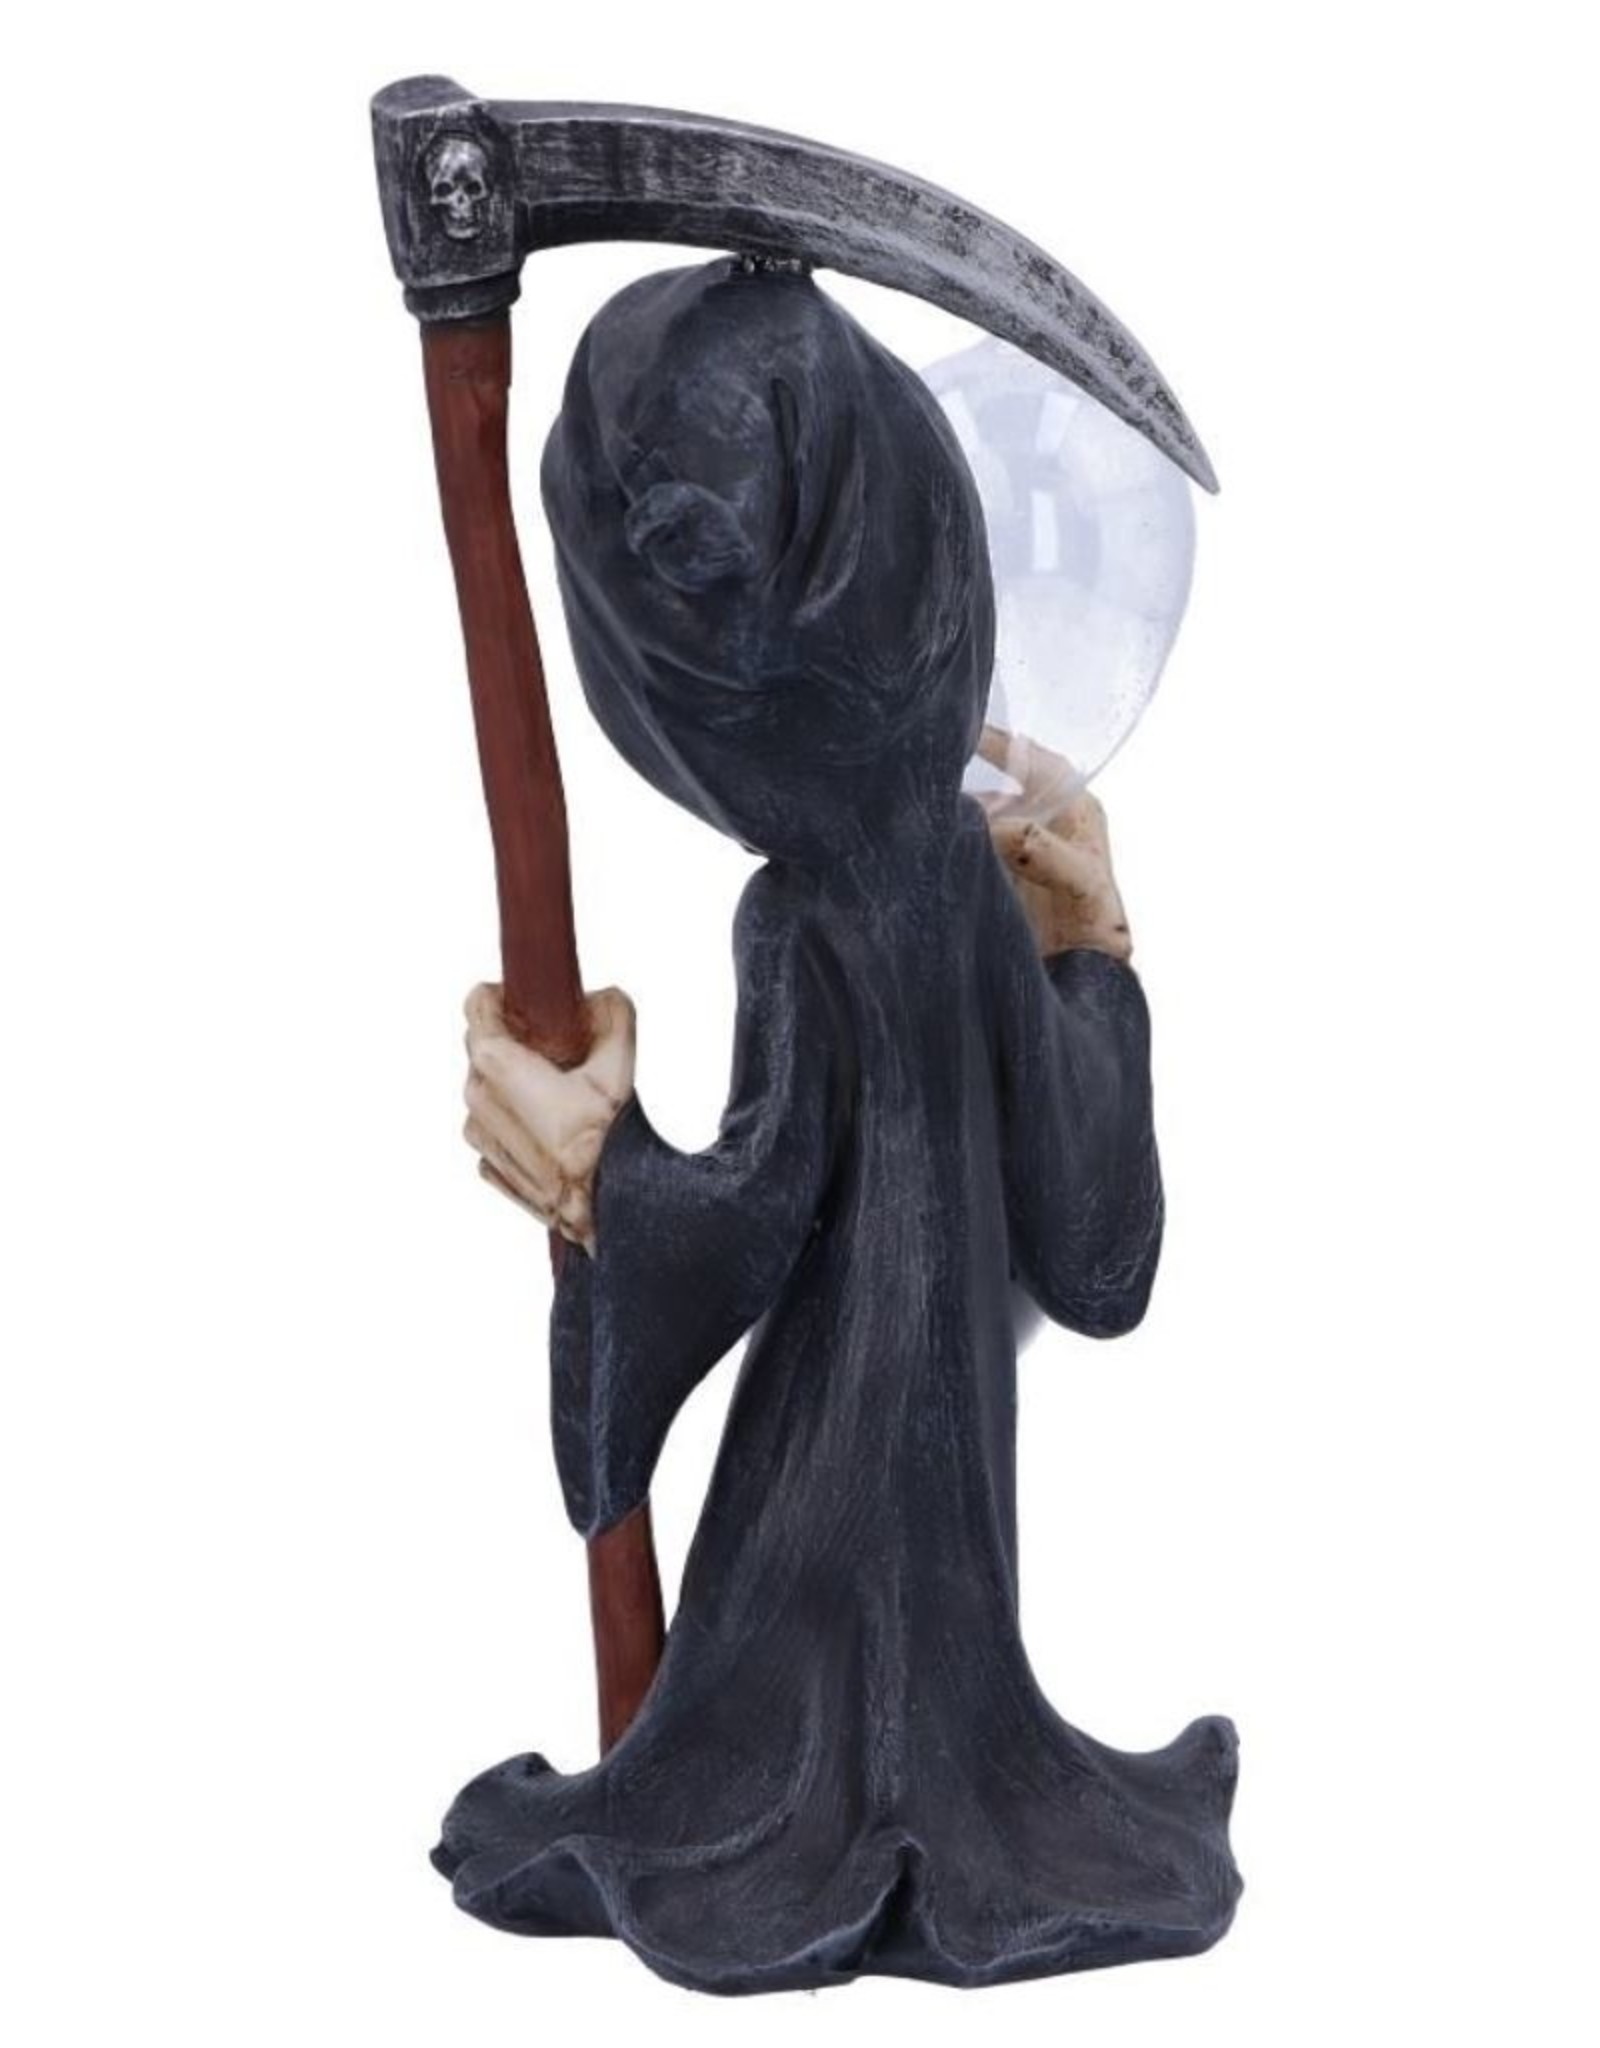 Alator Giftware & Lifestyle - Out of Time Cartoon Grim Reaper Sand Timer 20.5cm